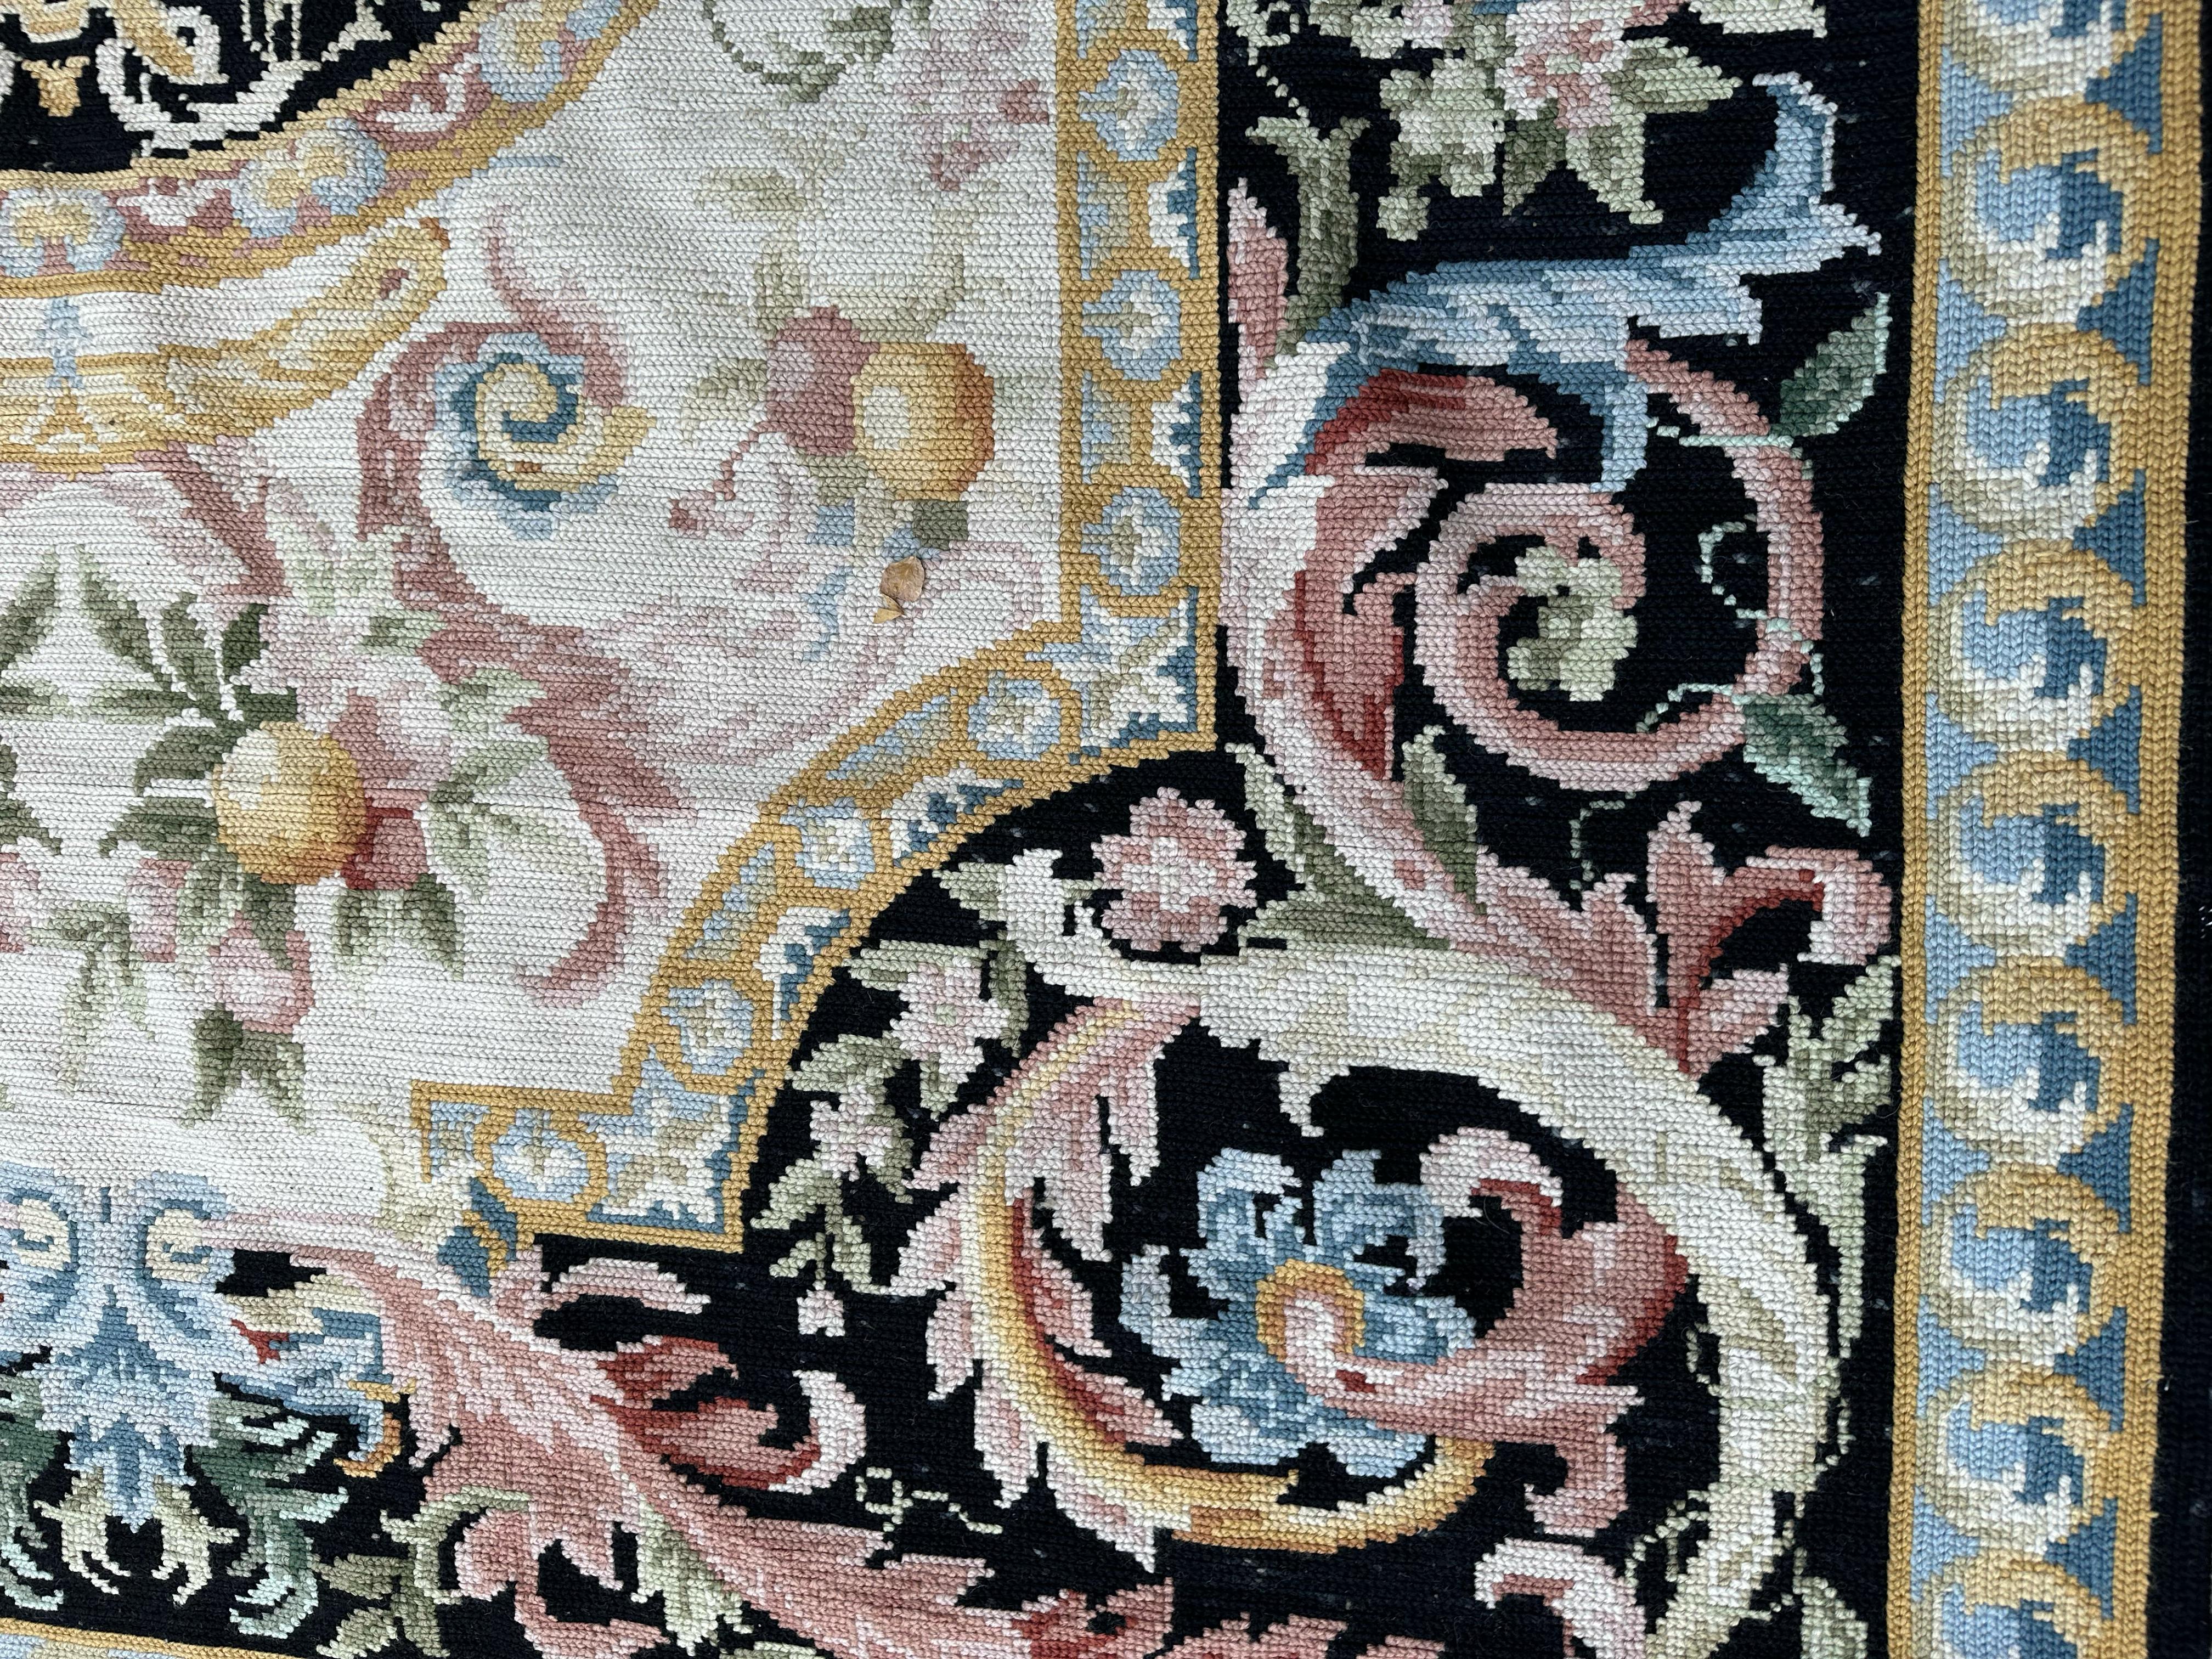 
The Arraiolos Tapestry, also known as Arraiolos Embroidery, is a traditional Portuguese needlework technique that originated in the town of Arraiolos, located in the Alentejo region of Portugal. It is characterized by intricate woolen stitches